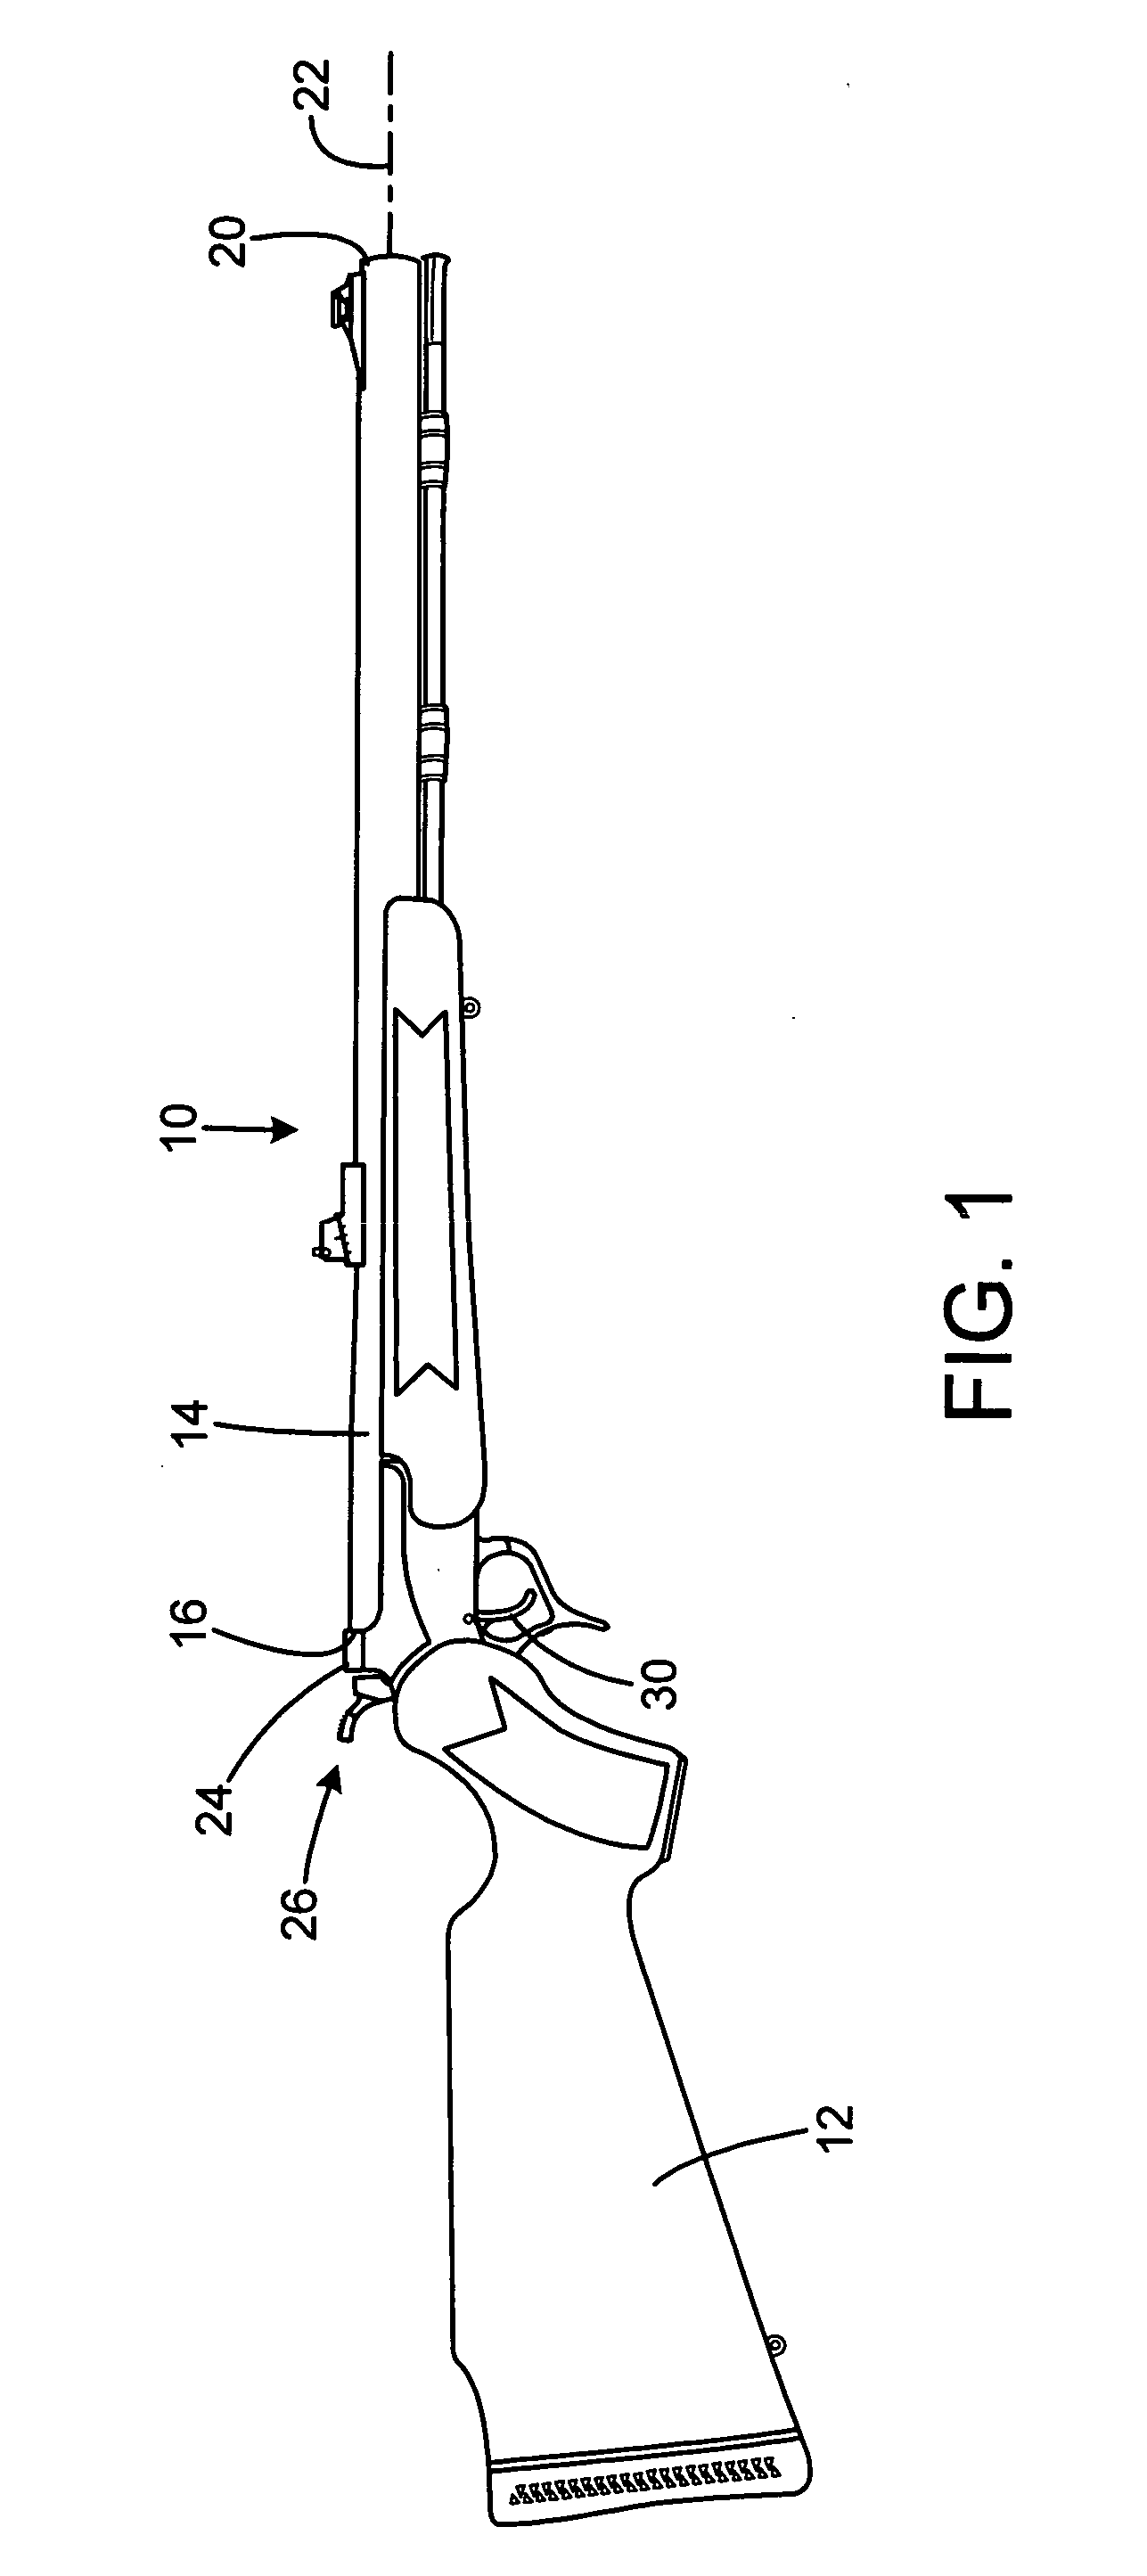 Lubricating apparatus for a threaded rifle breech